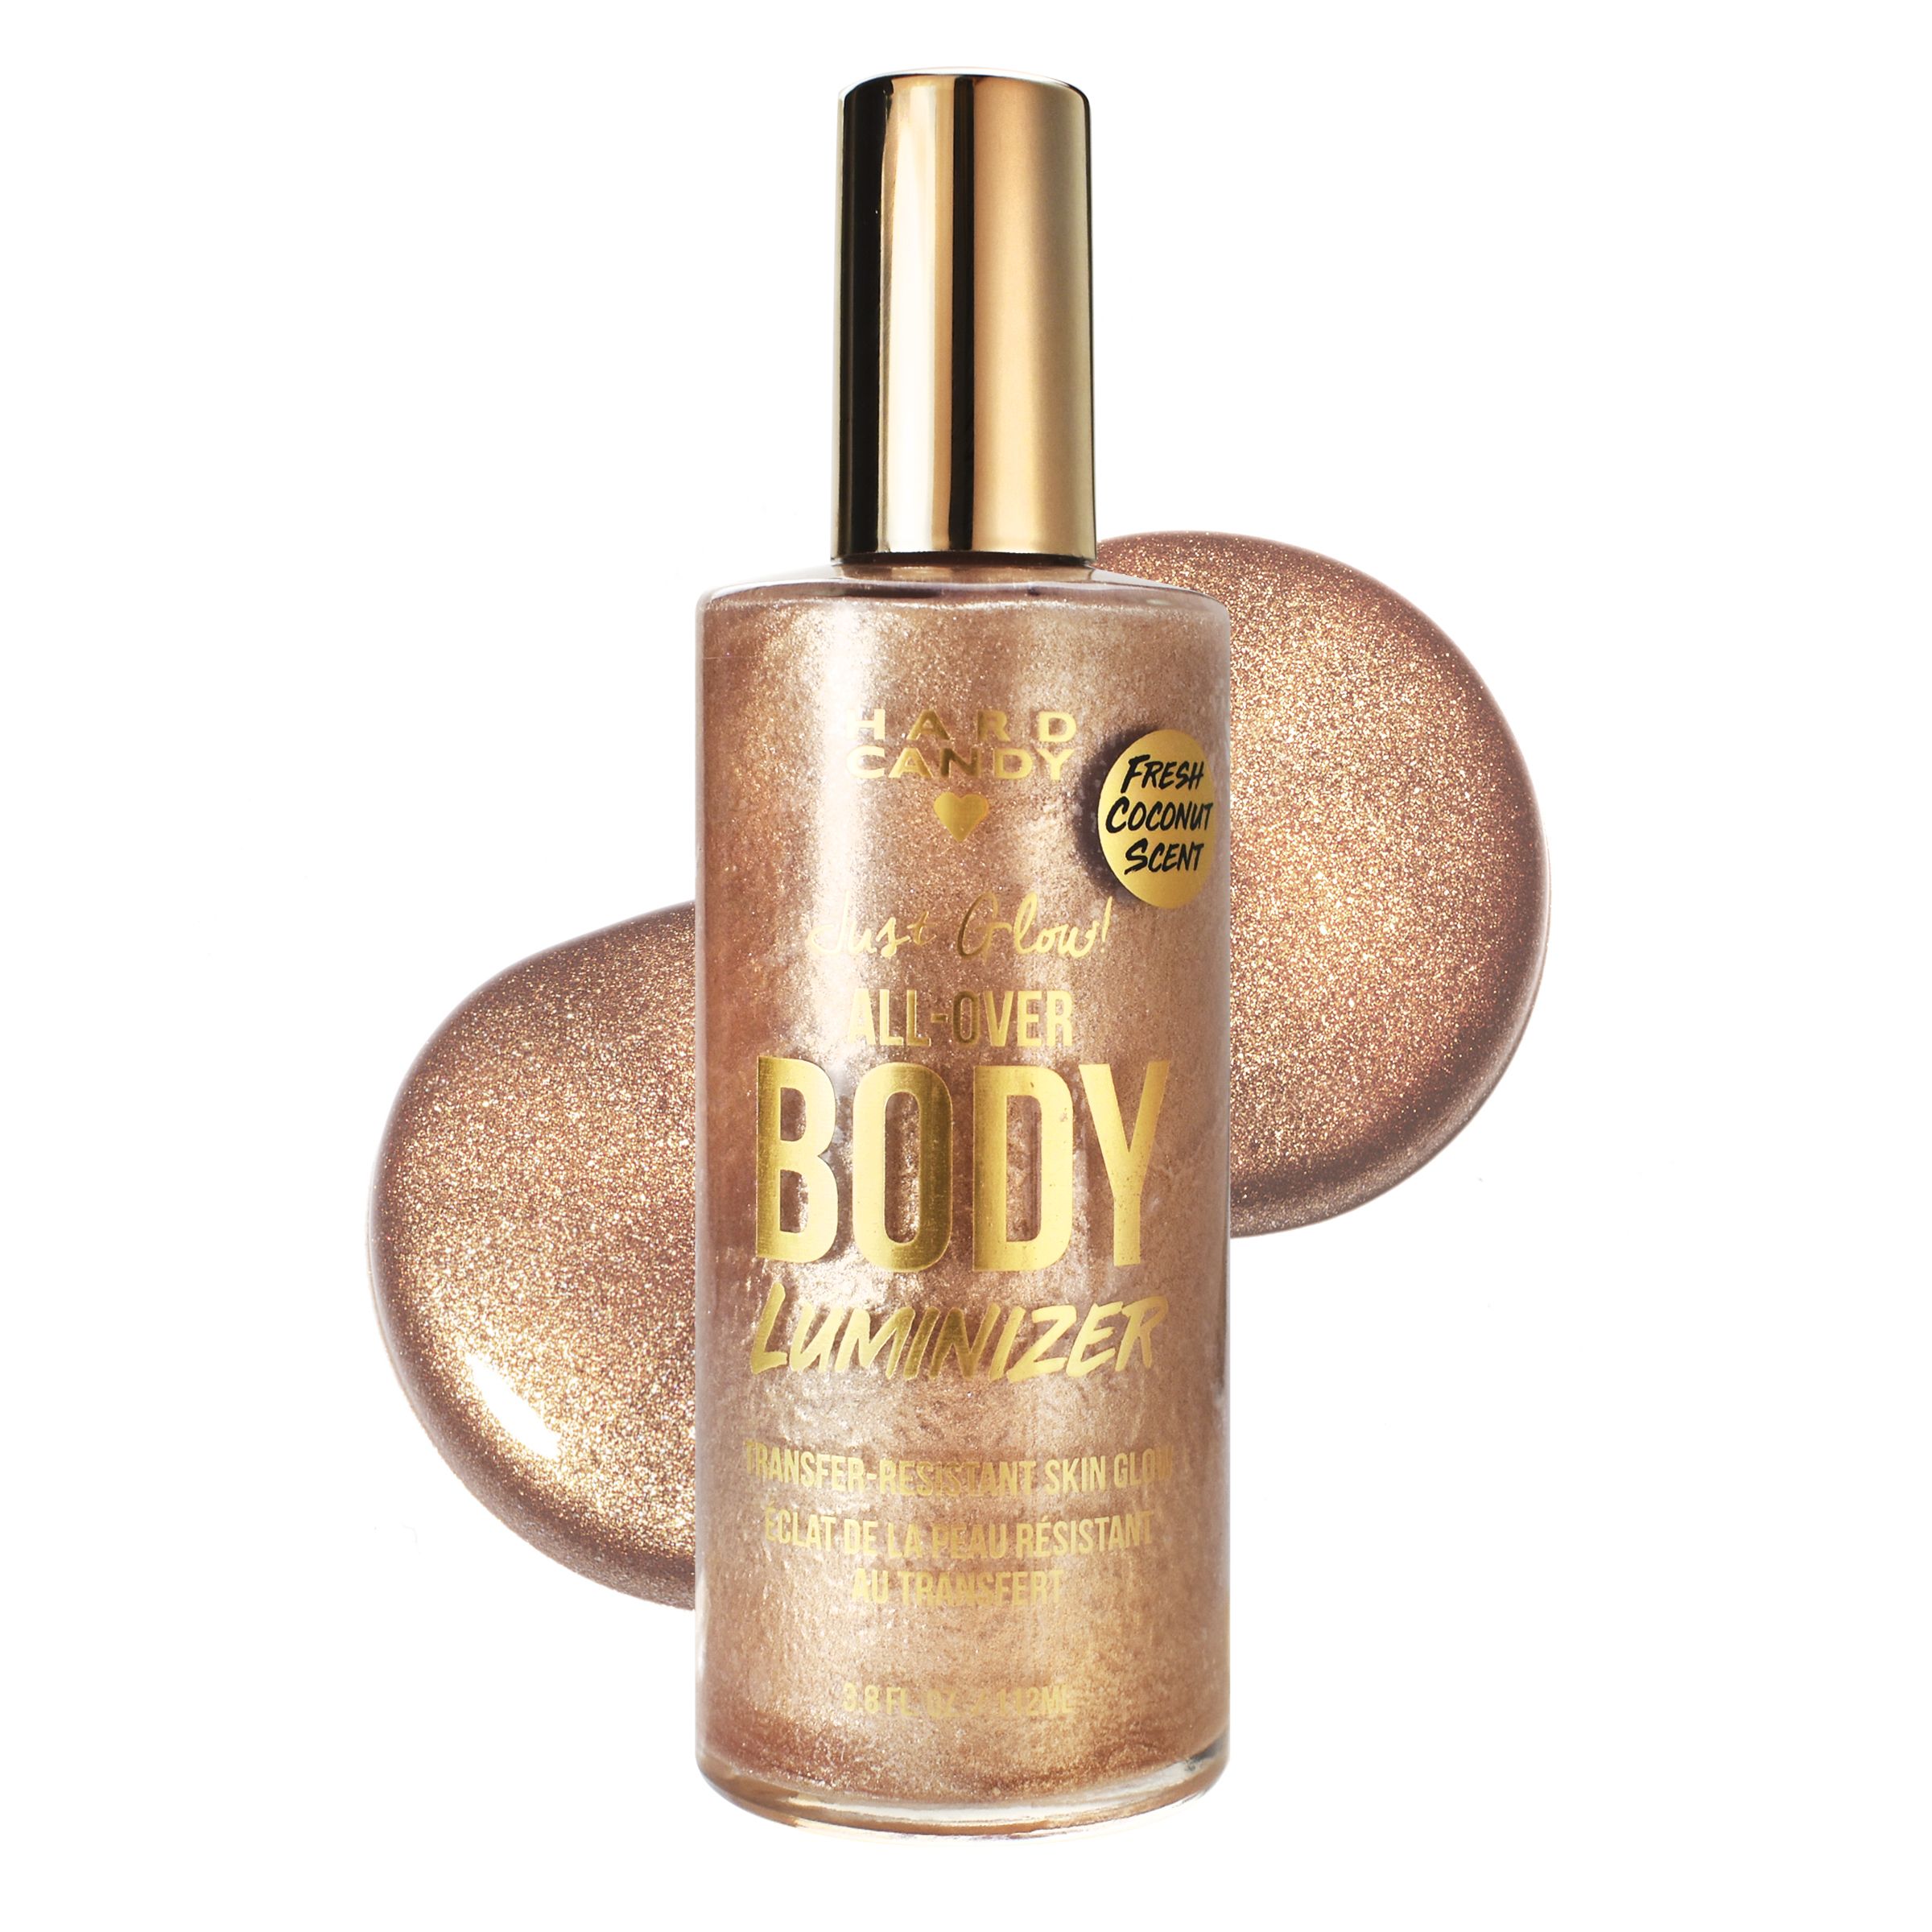 Hard Candy Sheer Envy All Over Body Luminizer, Champagne | Walmart (US)